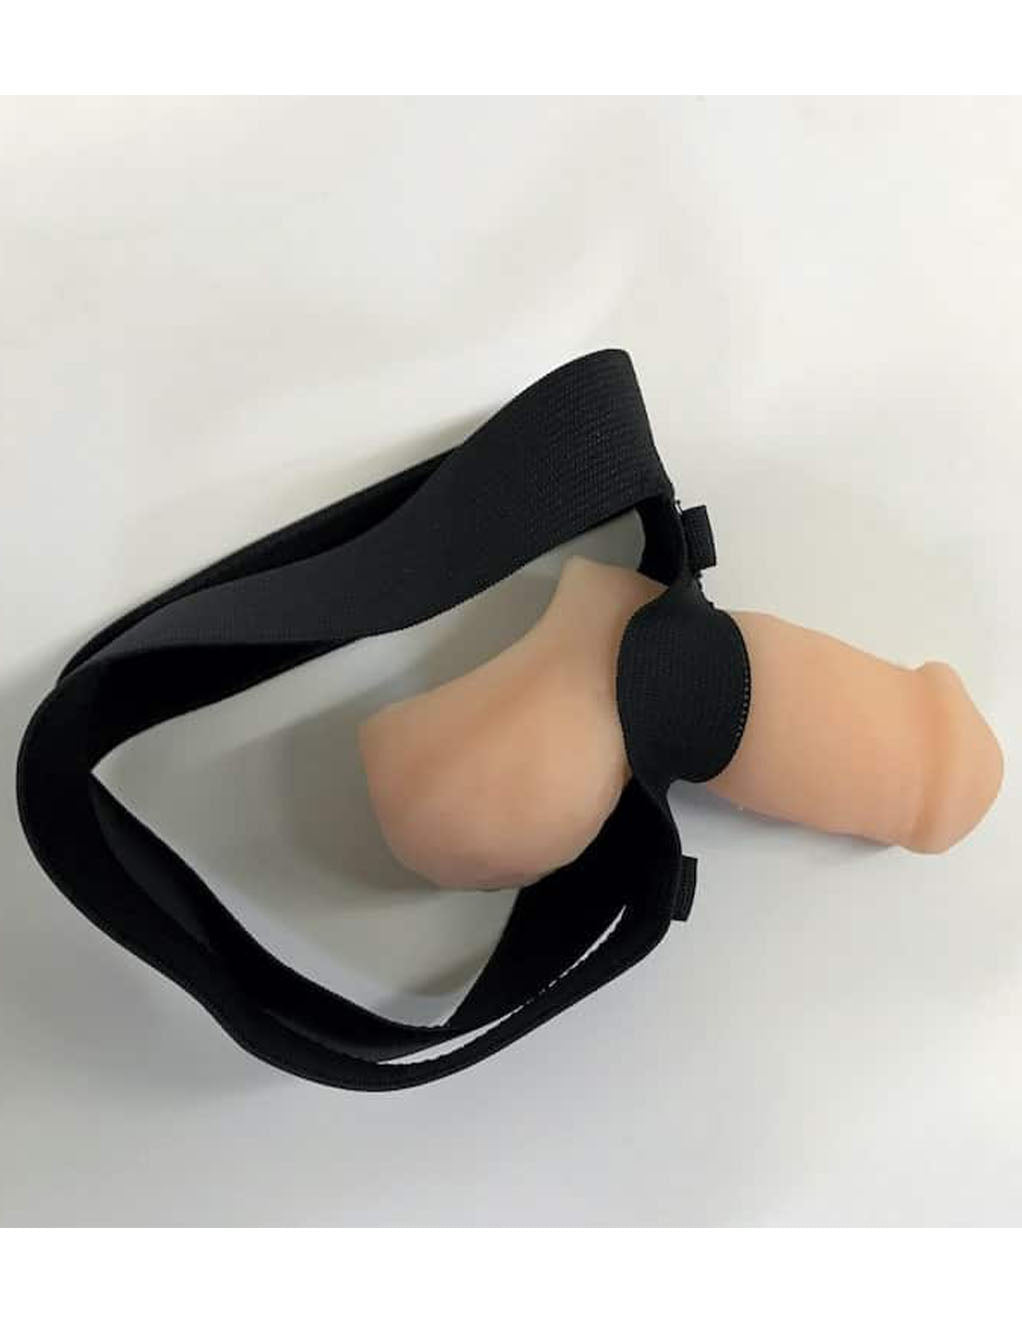 New York Toy Collective STP Packer Strap Harness- Side with STP Packer